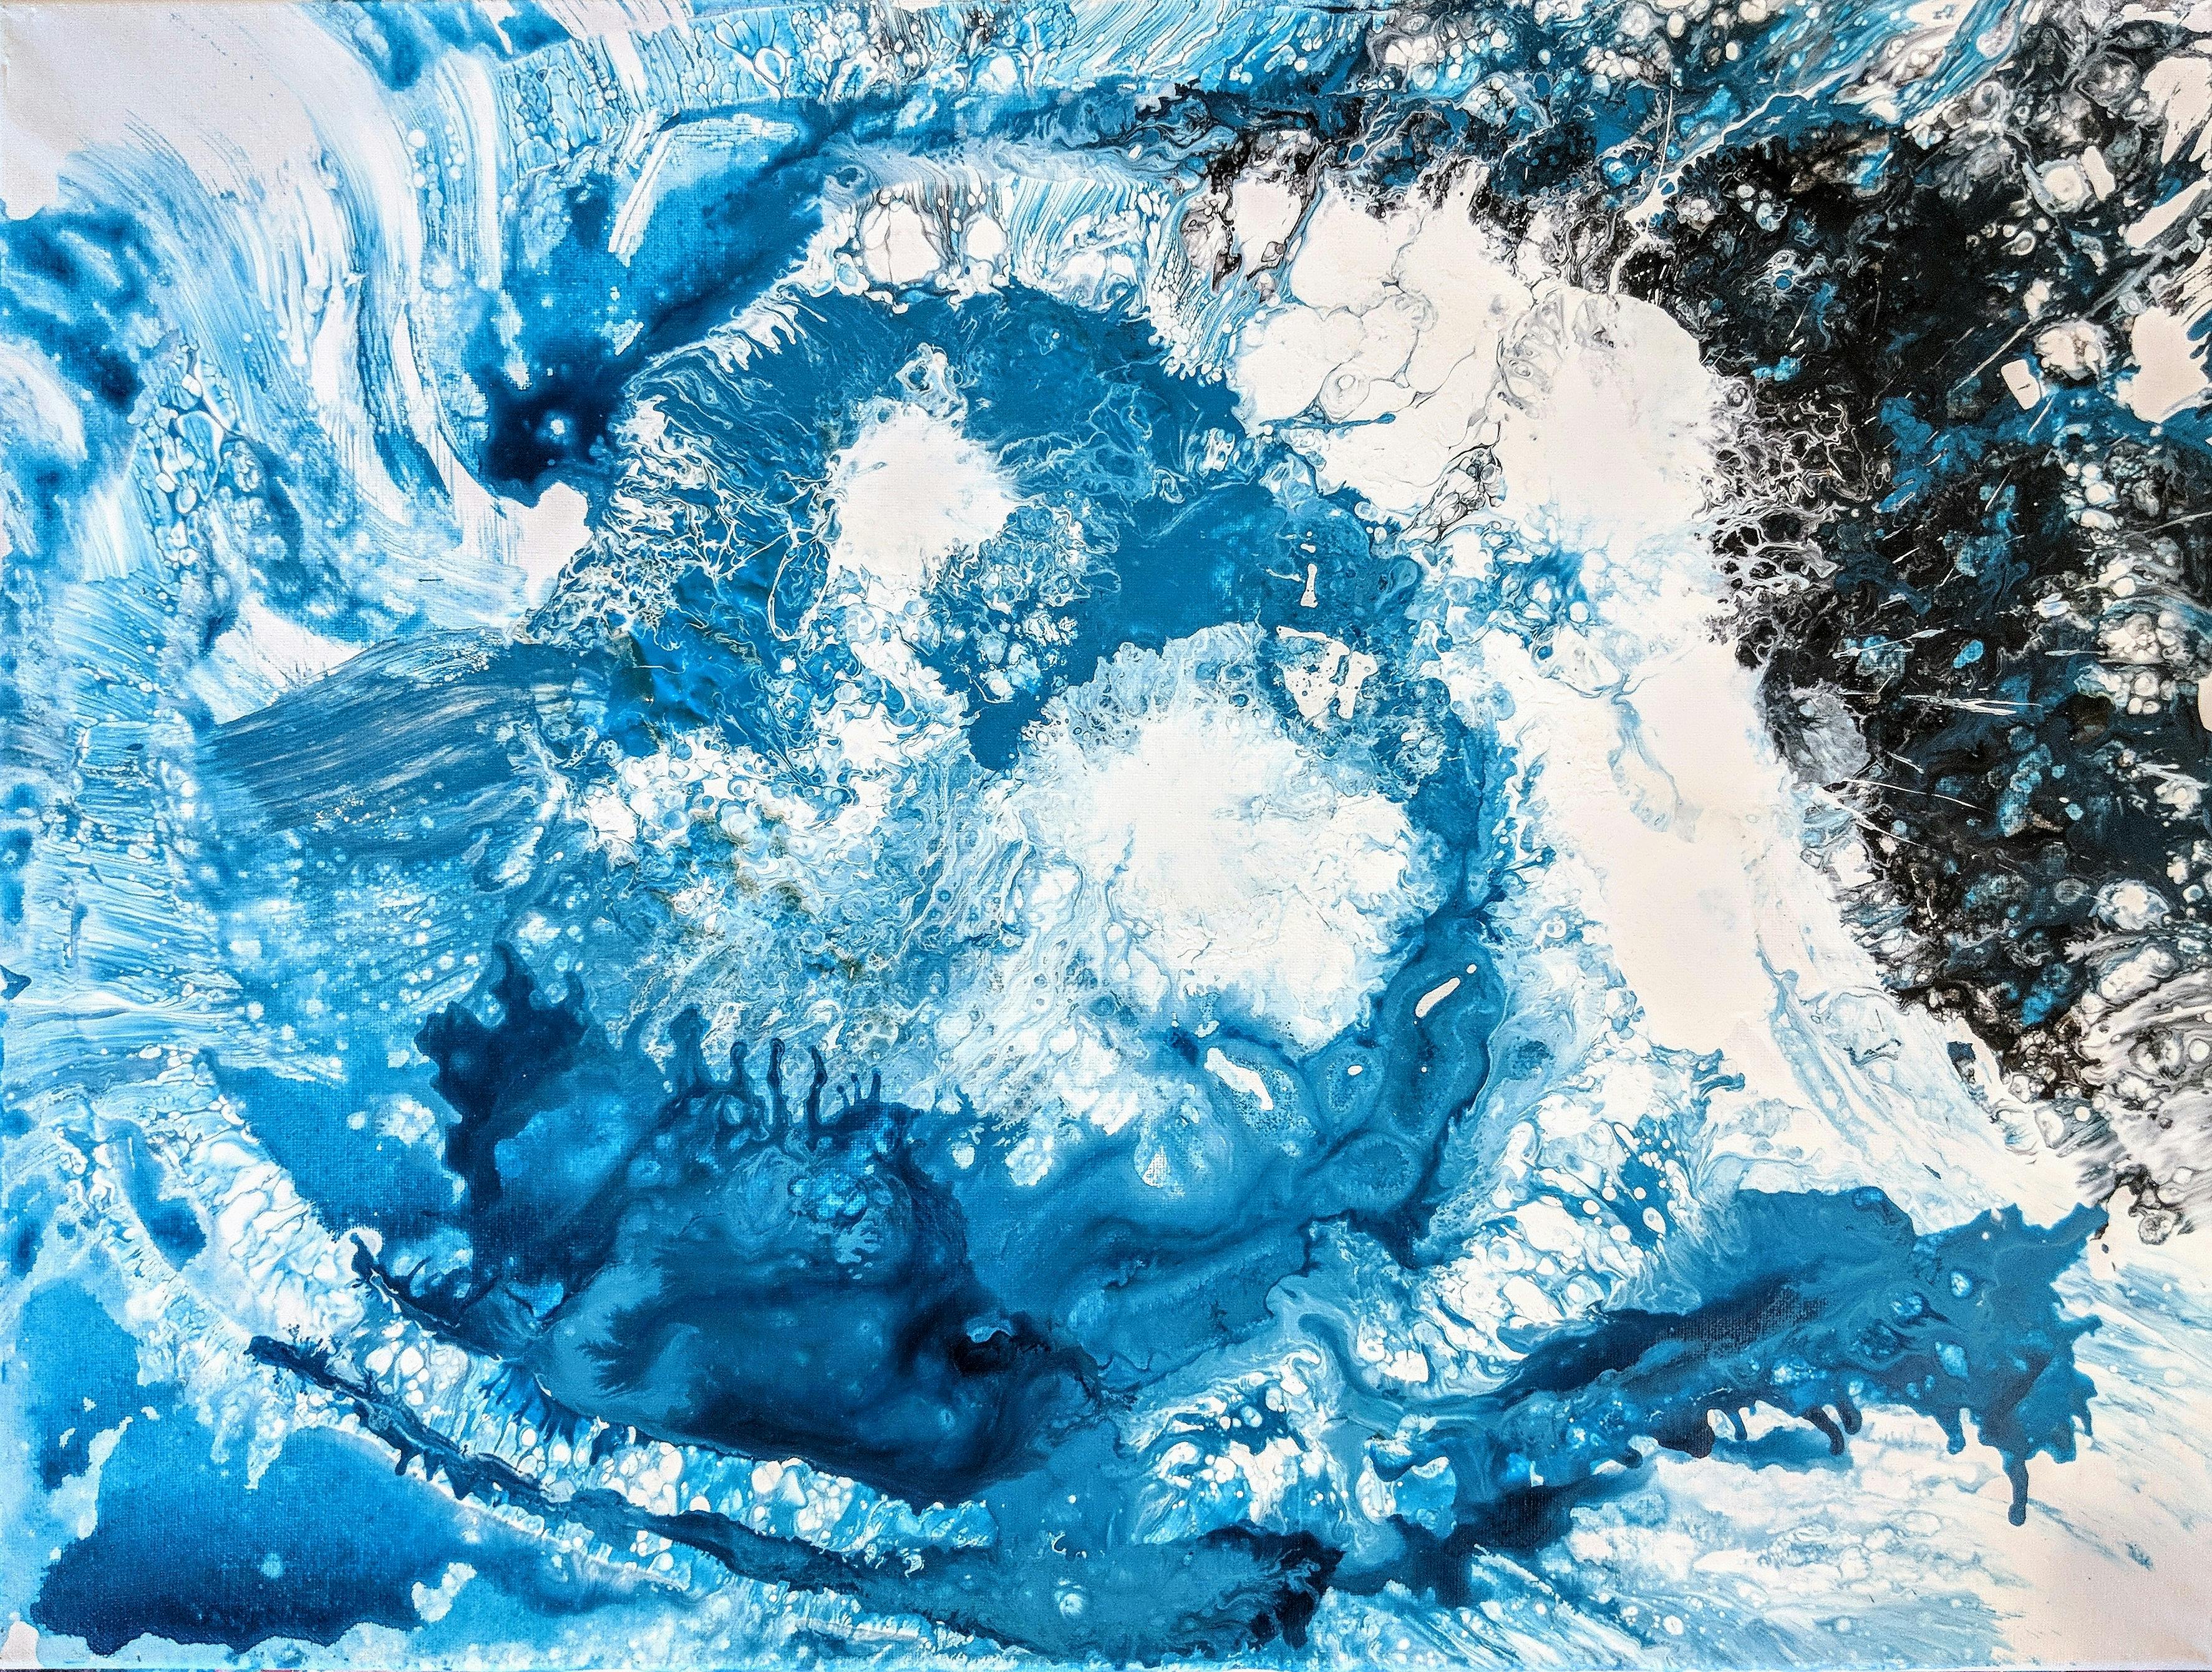 Free stock photo of abstract painting, Blue abstract painting, Fine art